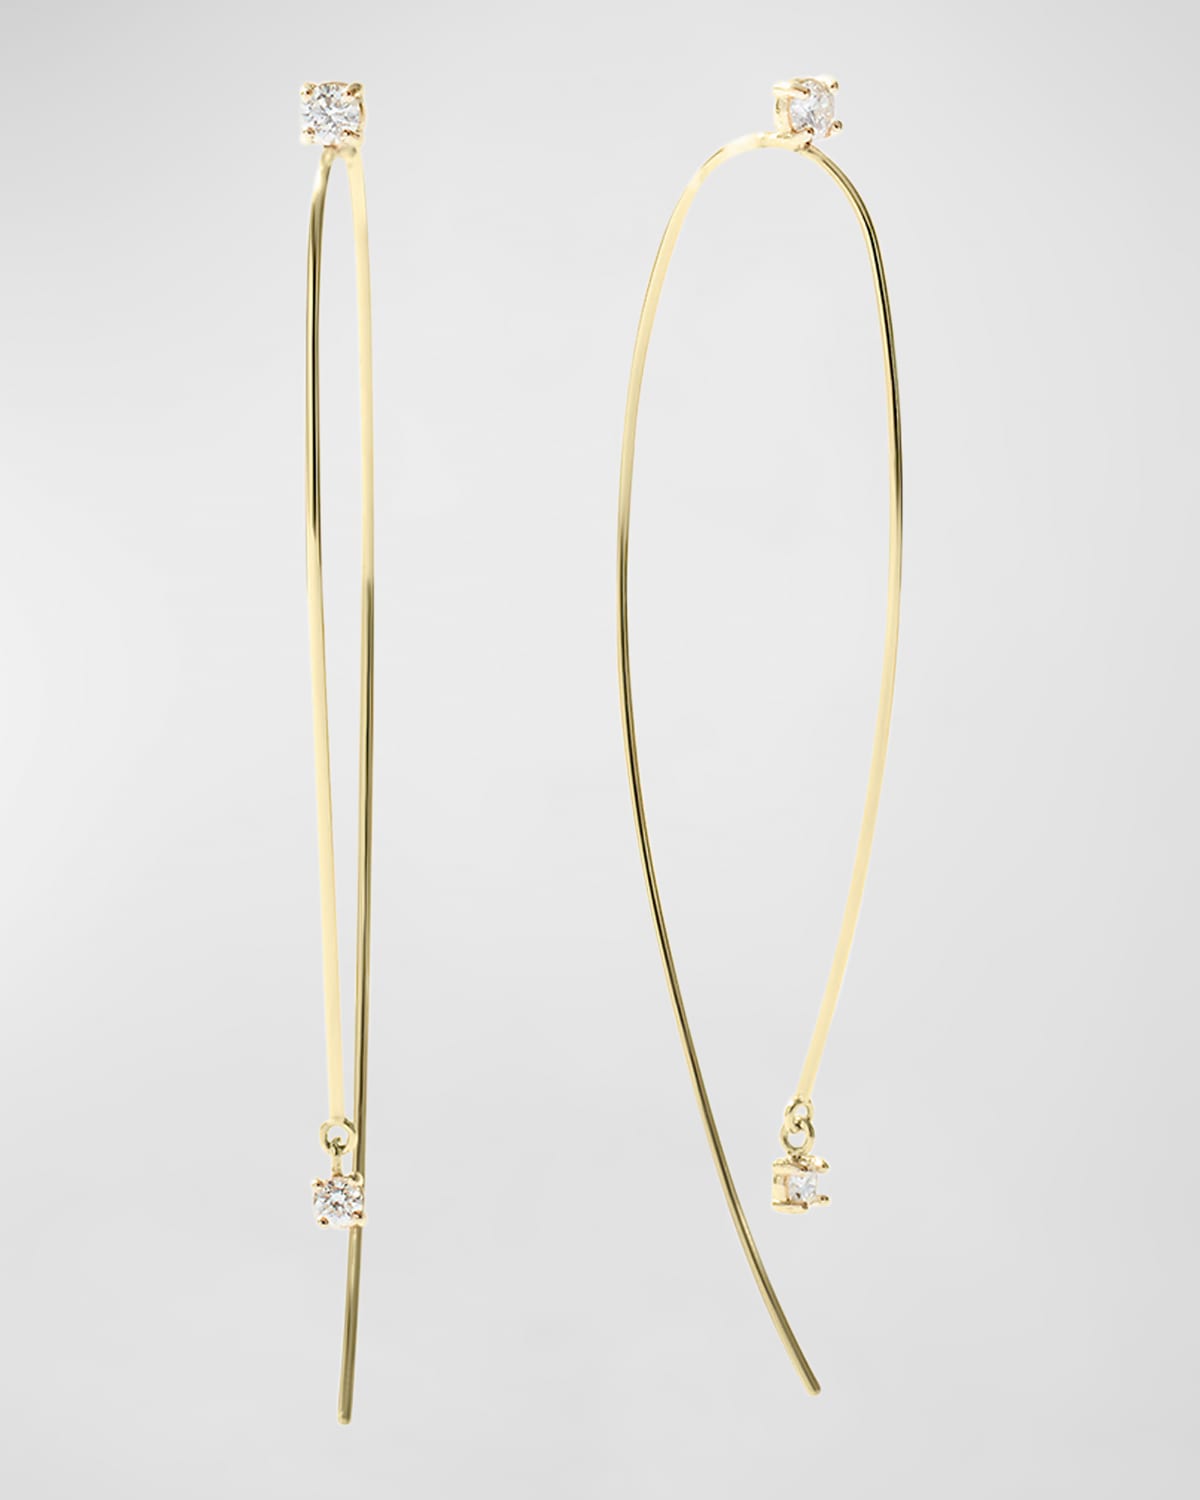 Lana 14k Gold Hooked On Hoops With Diamonds